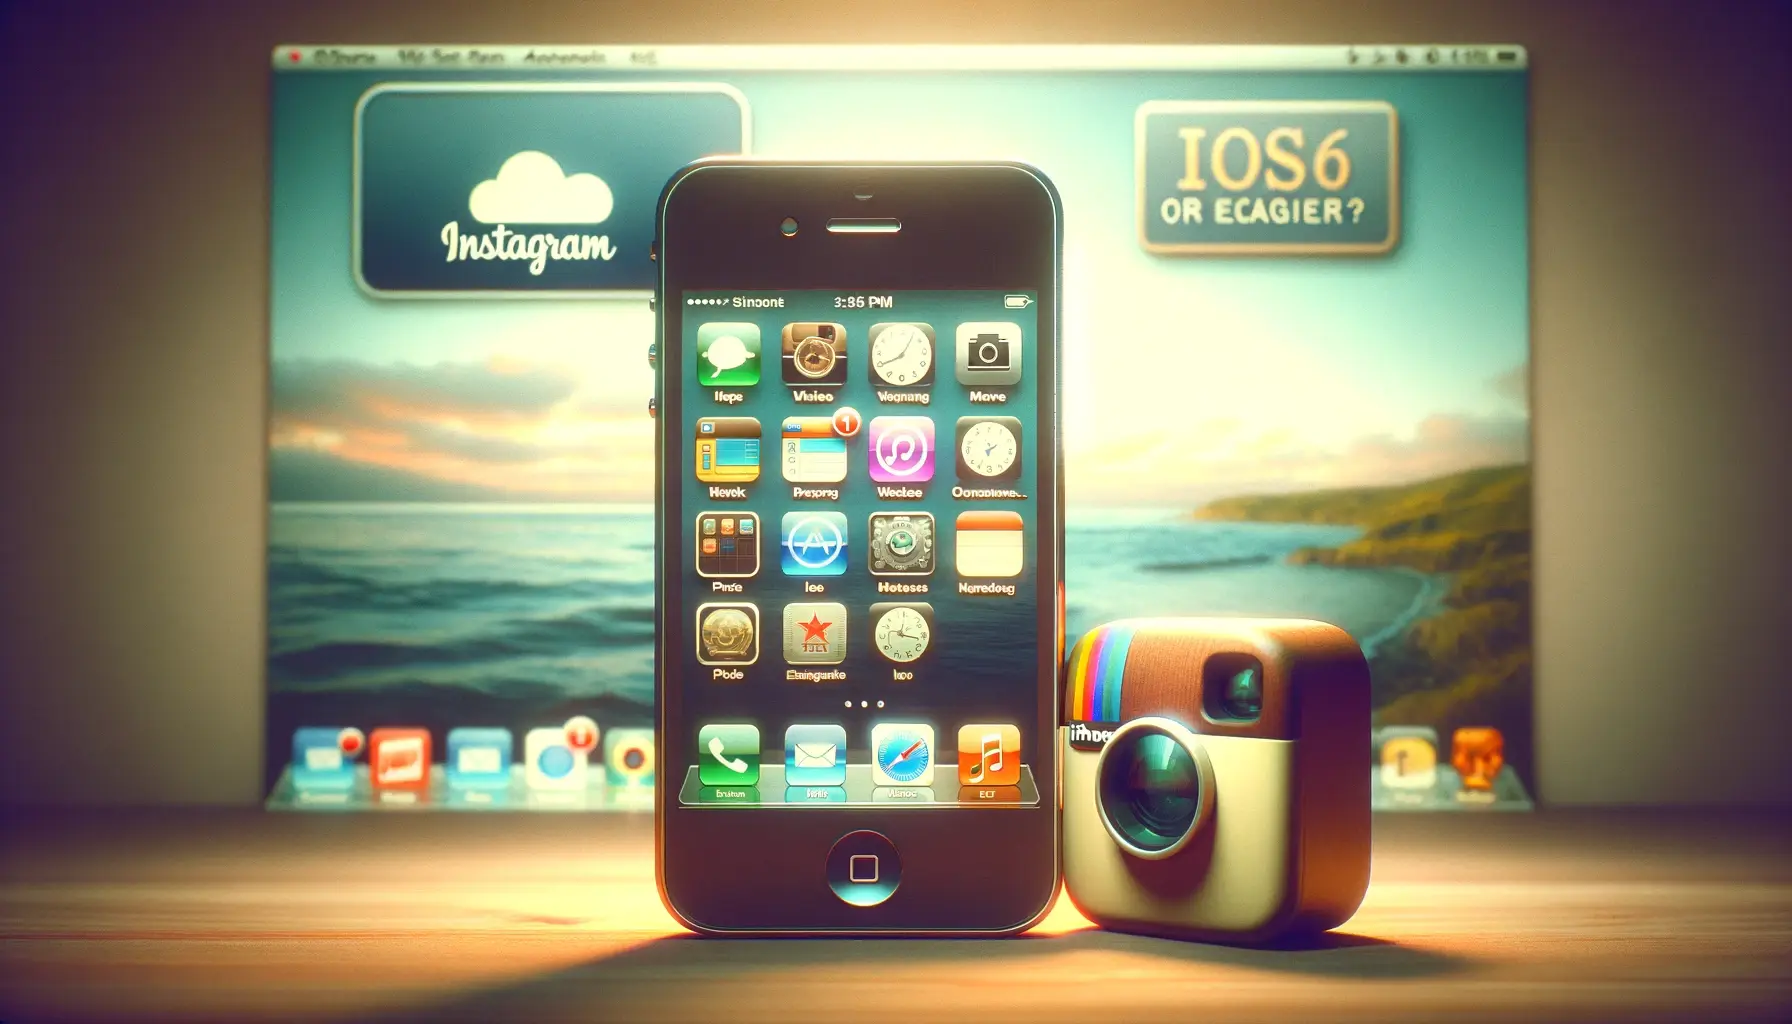 How to Download Instagram on iPhone  iOS6 or Earlier?